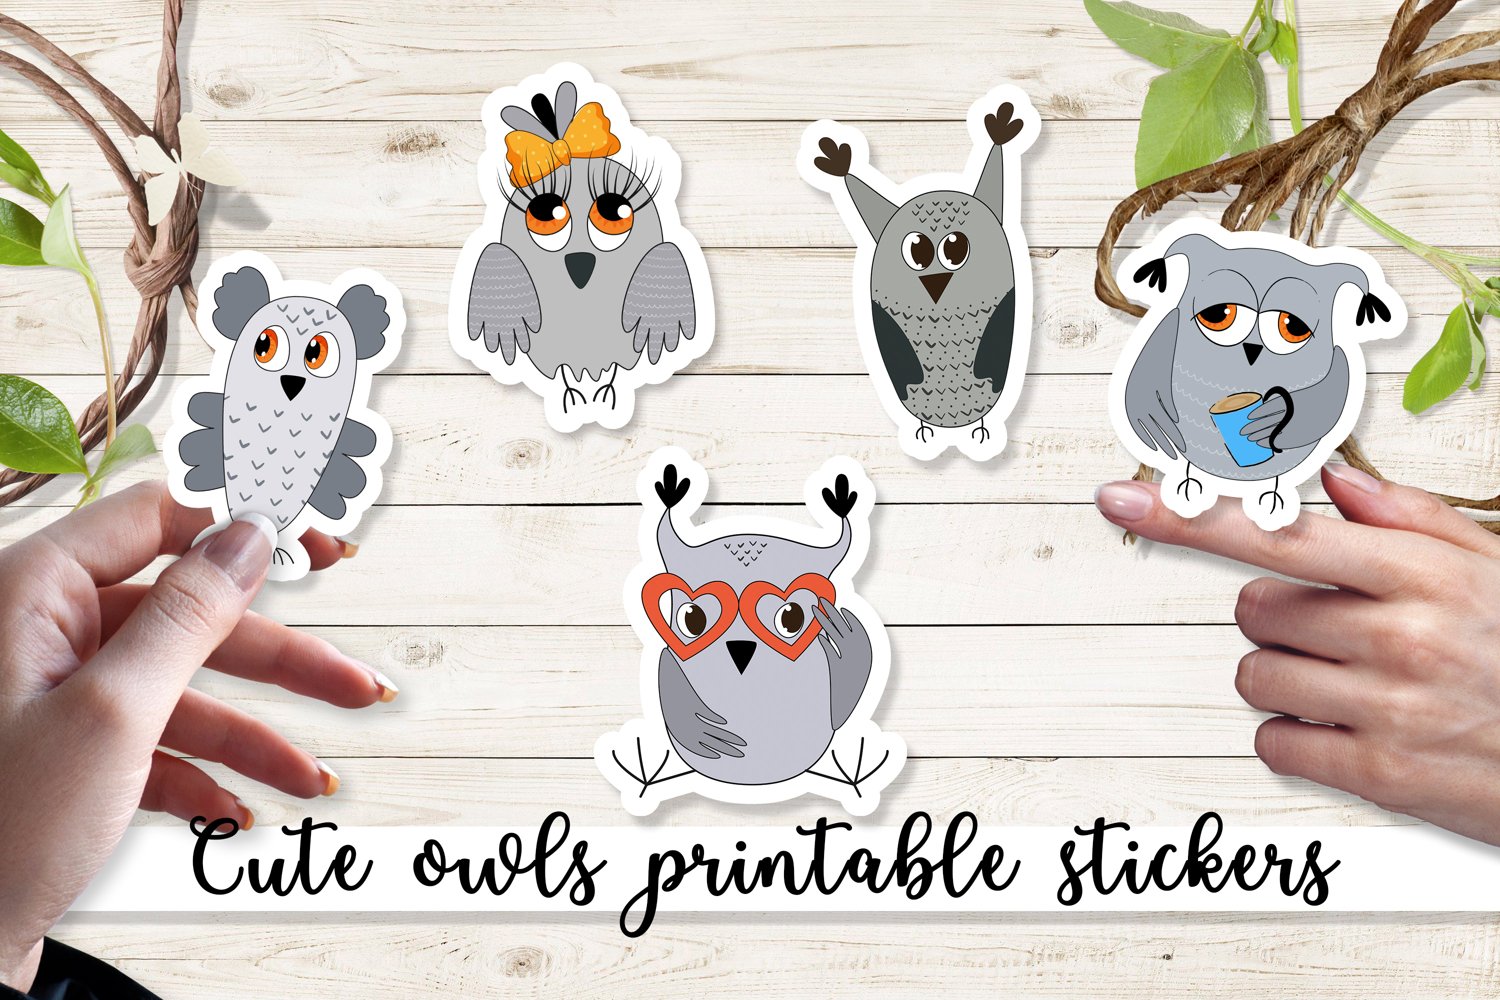 Cute owl printable stickers.